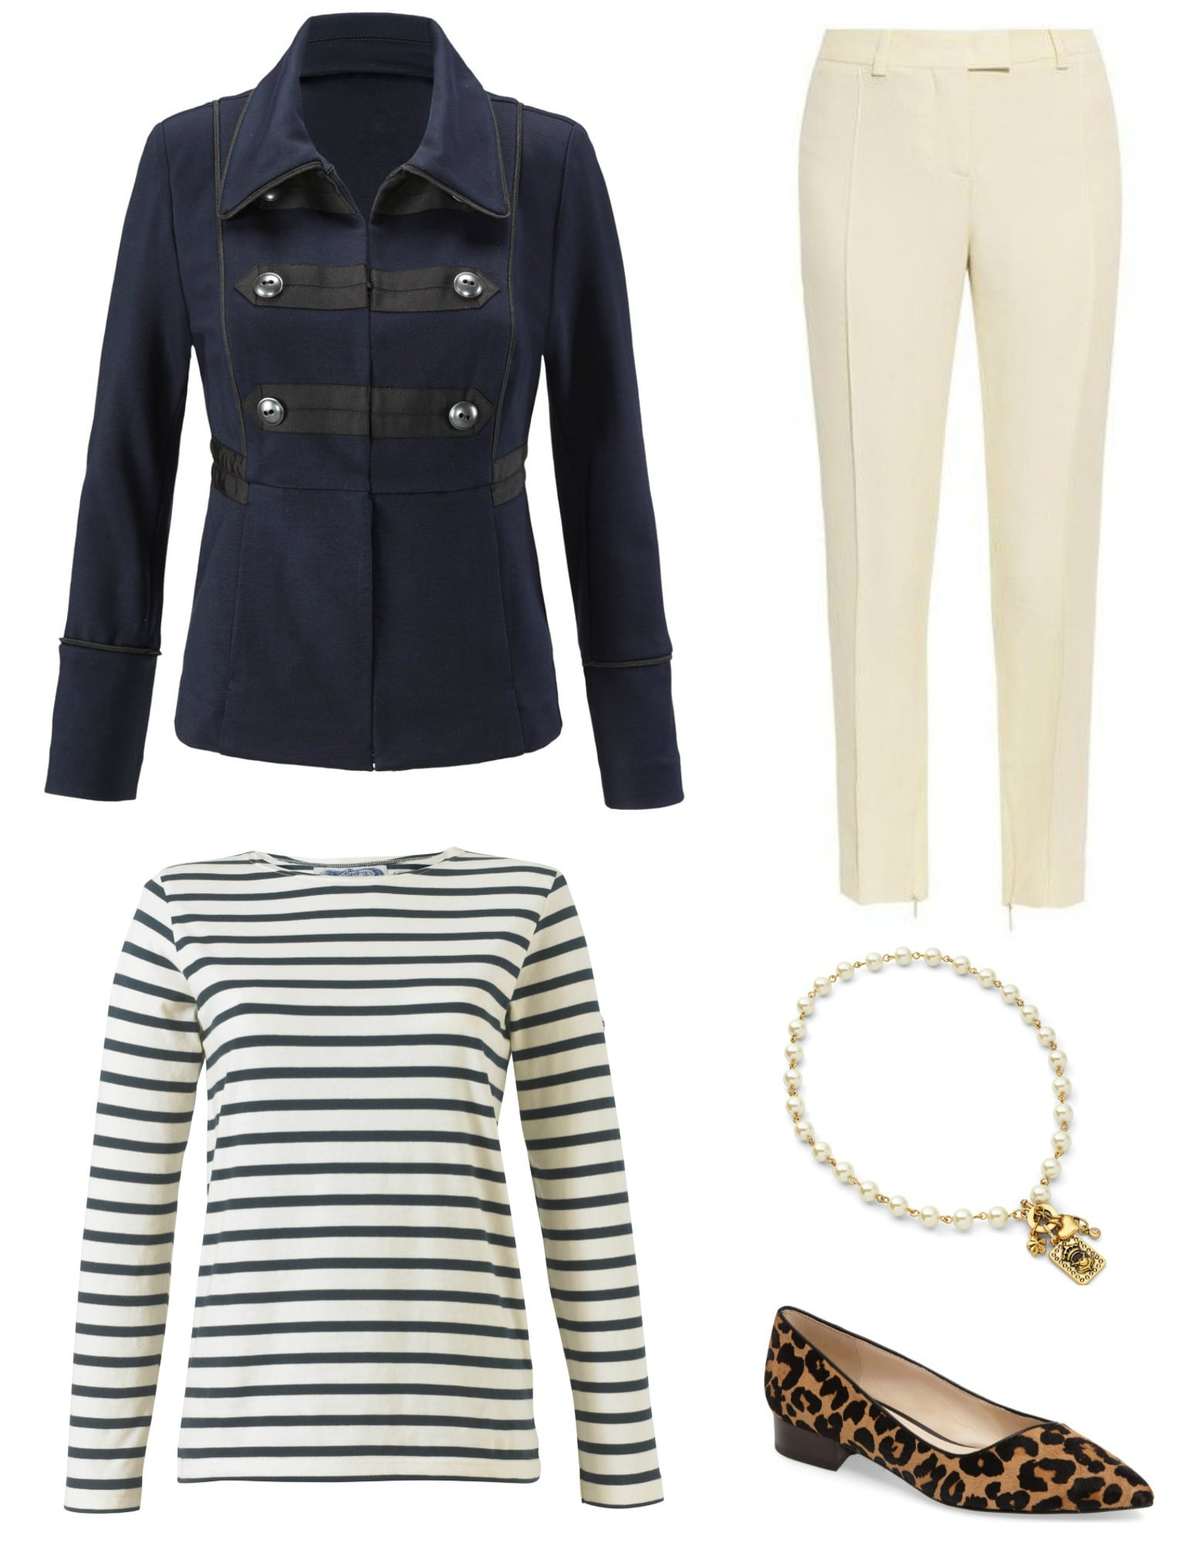 The cabi In The Band Jacket styled with a classic Breton top, ivory ankle length trousers (yes you can mix white with ivory!), cabi Heritage Necklace, and Cole Haan Heidy flats in leopard calfhair.